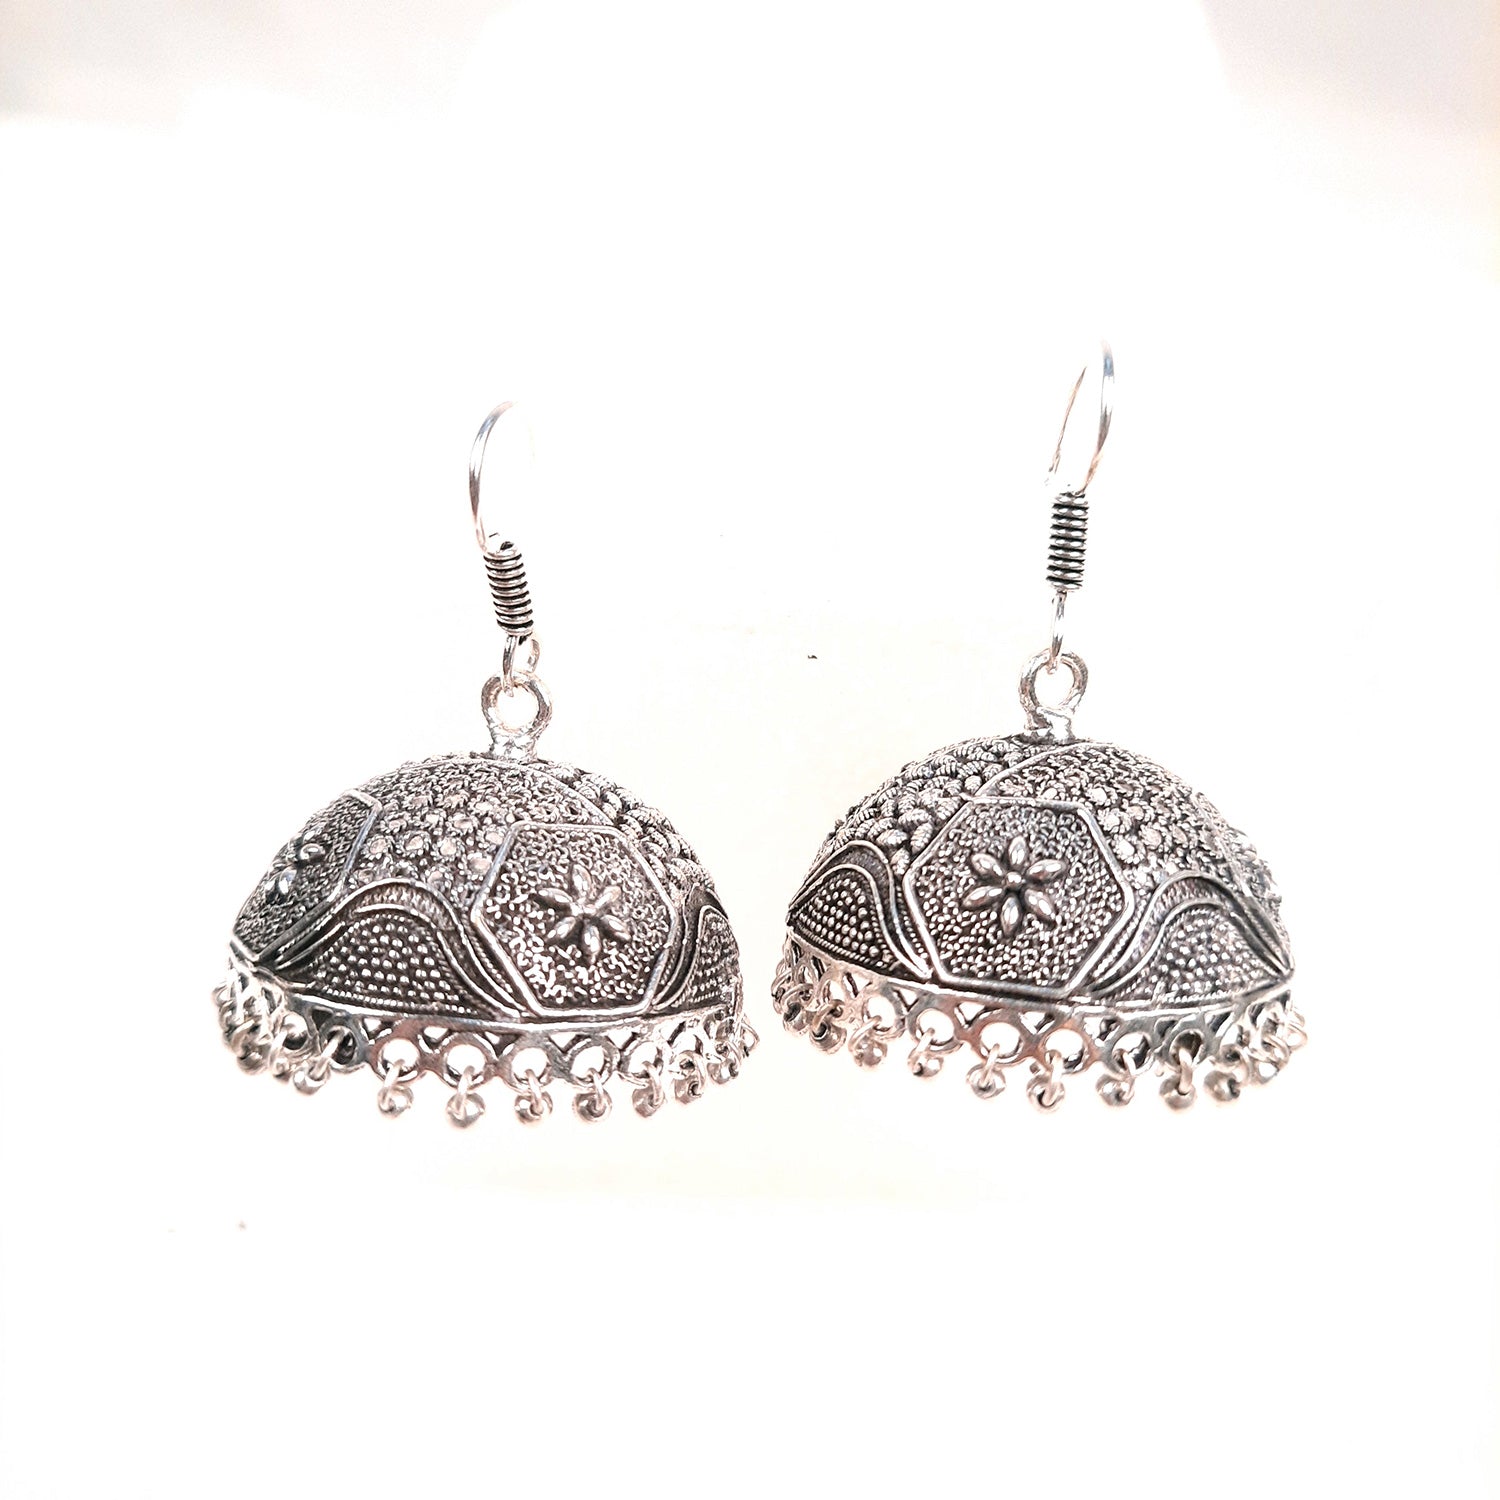 Oxidised Silver Jhumka earrings for Girls and Women | Latest Stylish Fashion Jewellery | Gifts for Her, Friendship Day, Valentine's Day Gift - Apkamart